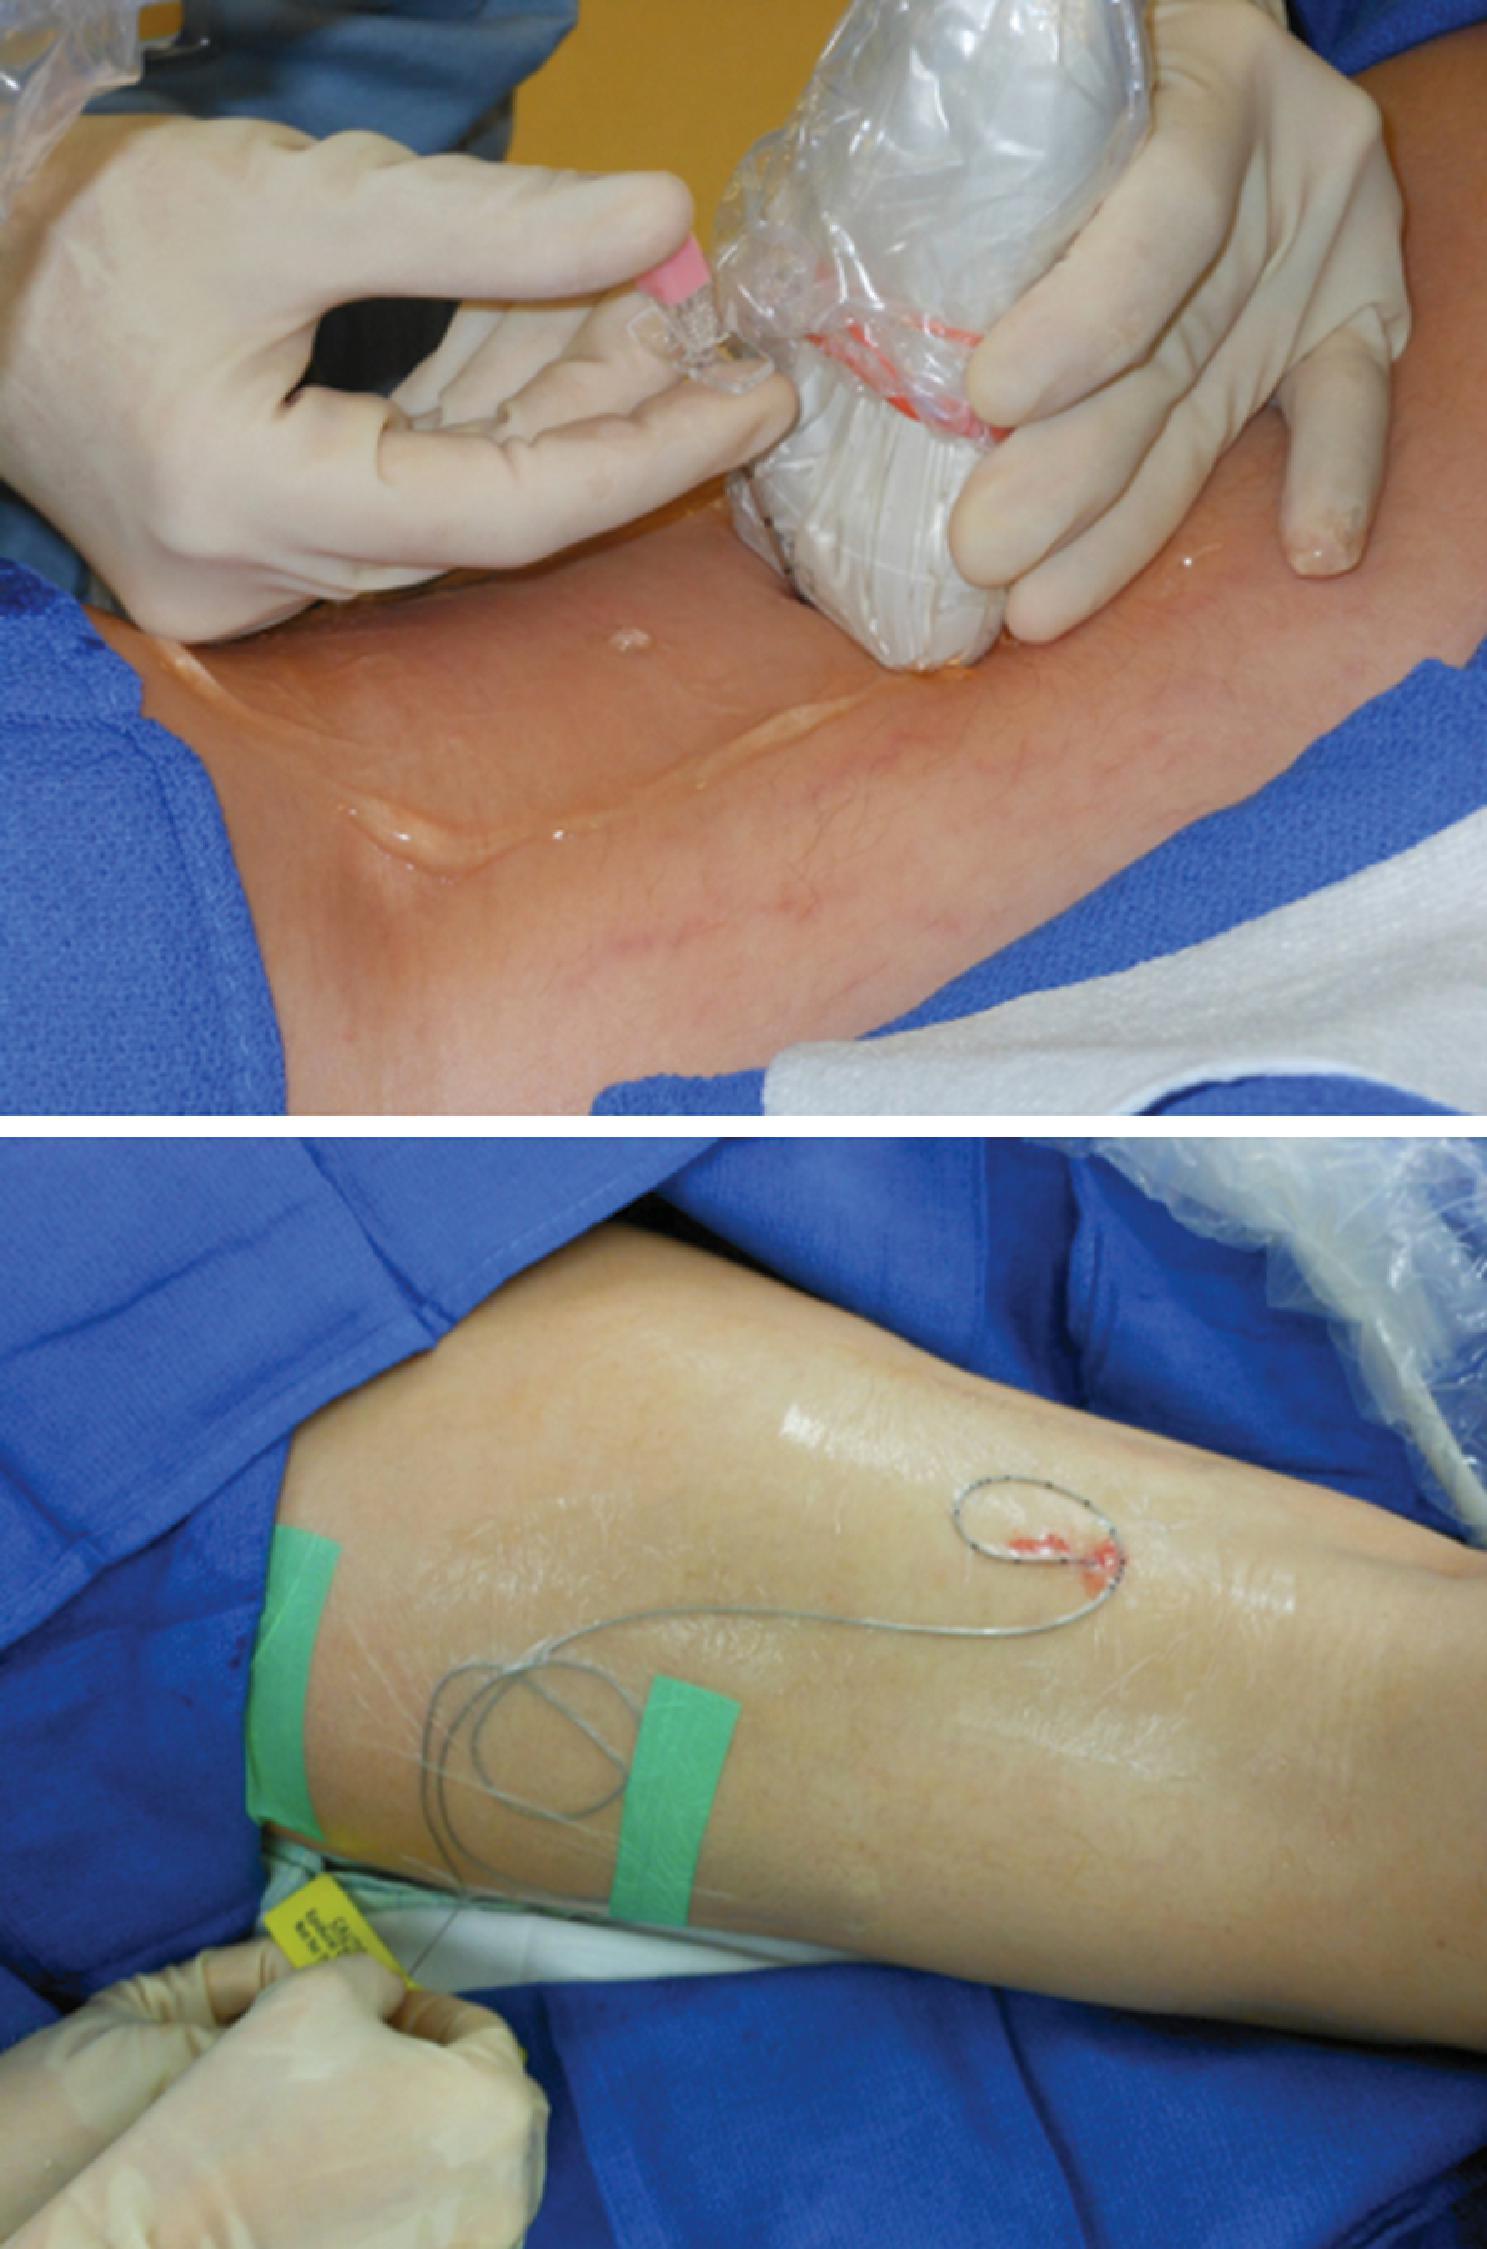 Figure 43.1, Sciatic nerve catheter for the management of complex regional pain syndrome type 1.